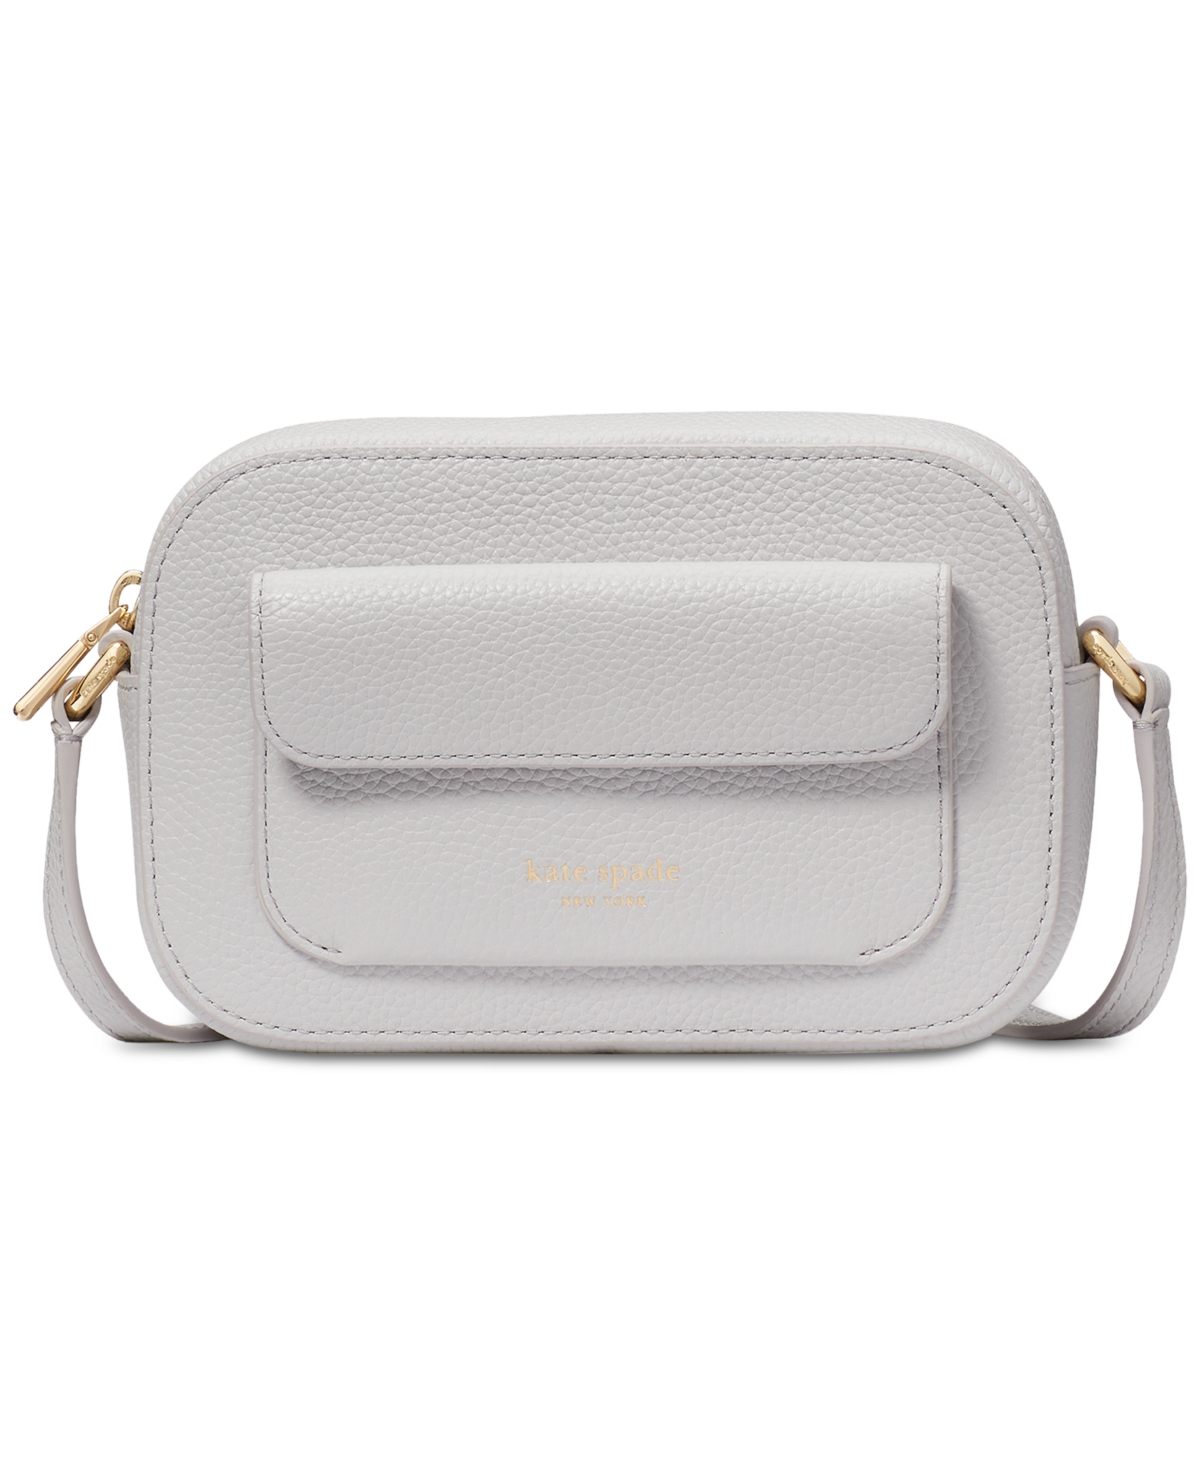 Kate Spade Ava Pebbled Leather Crossbody In Paltinum Gray